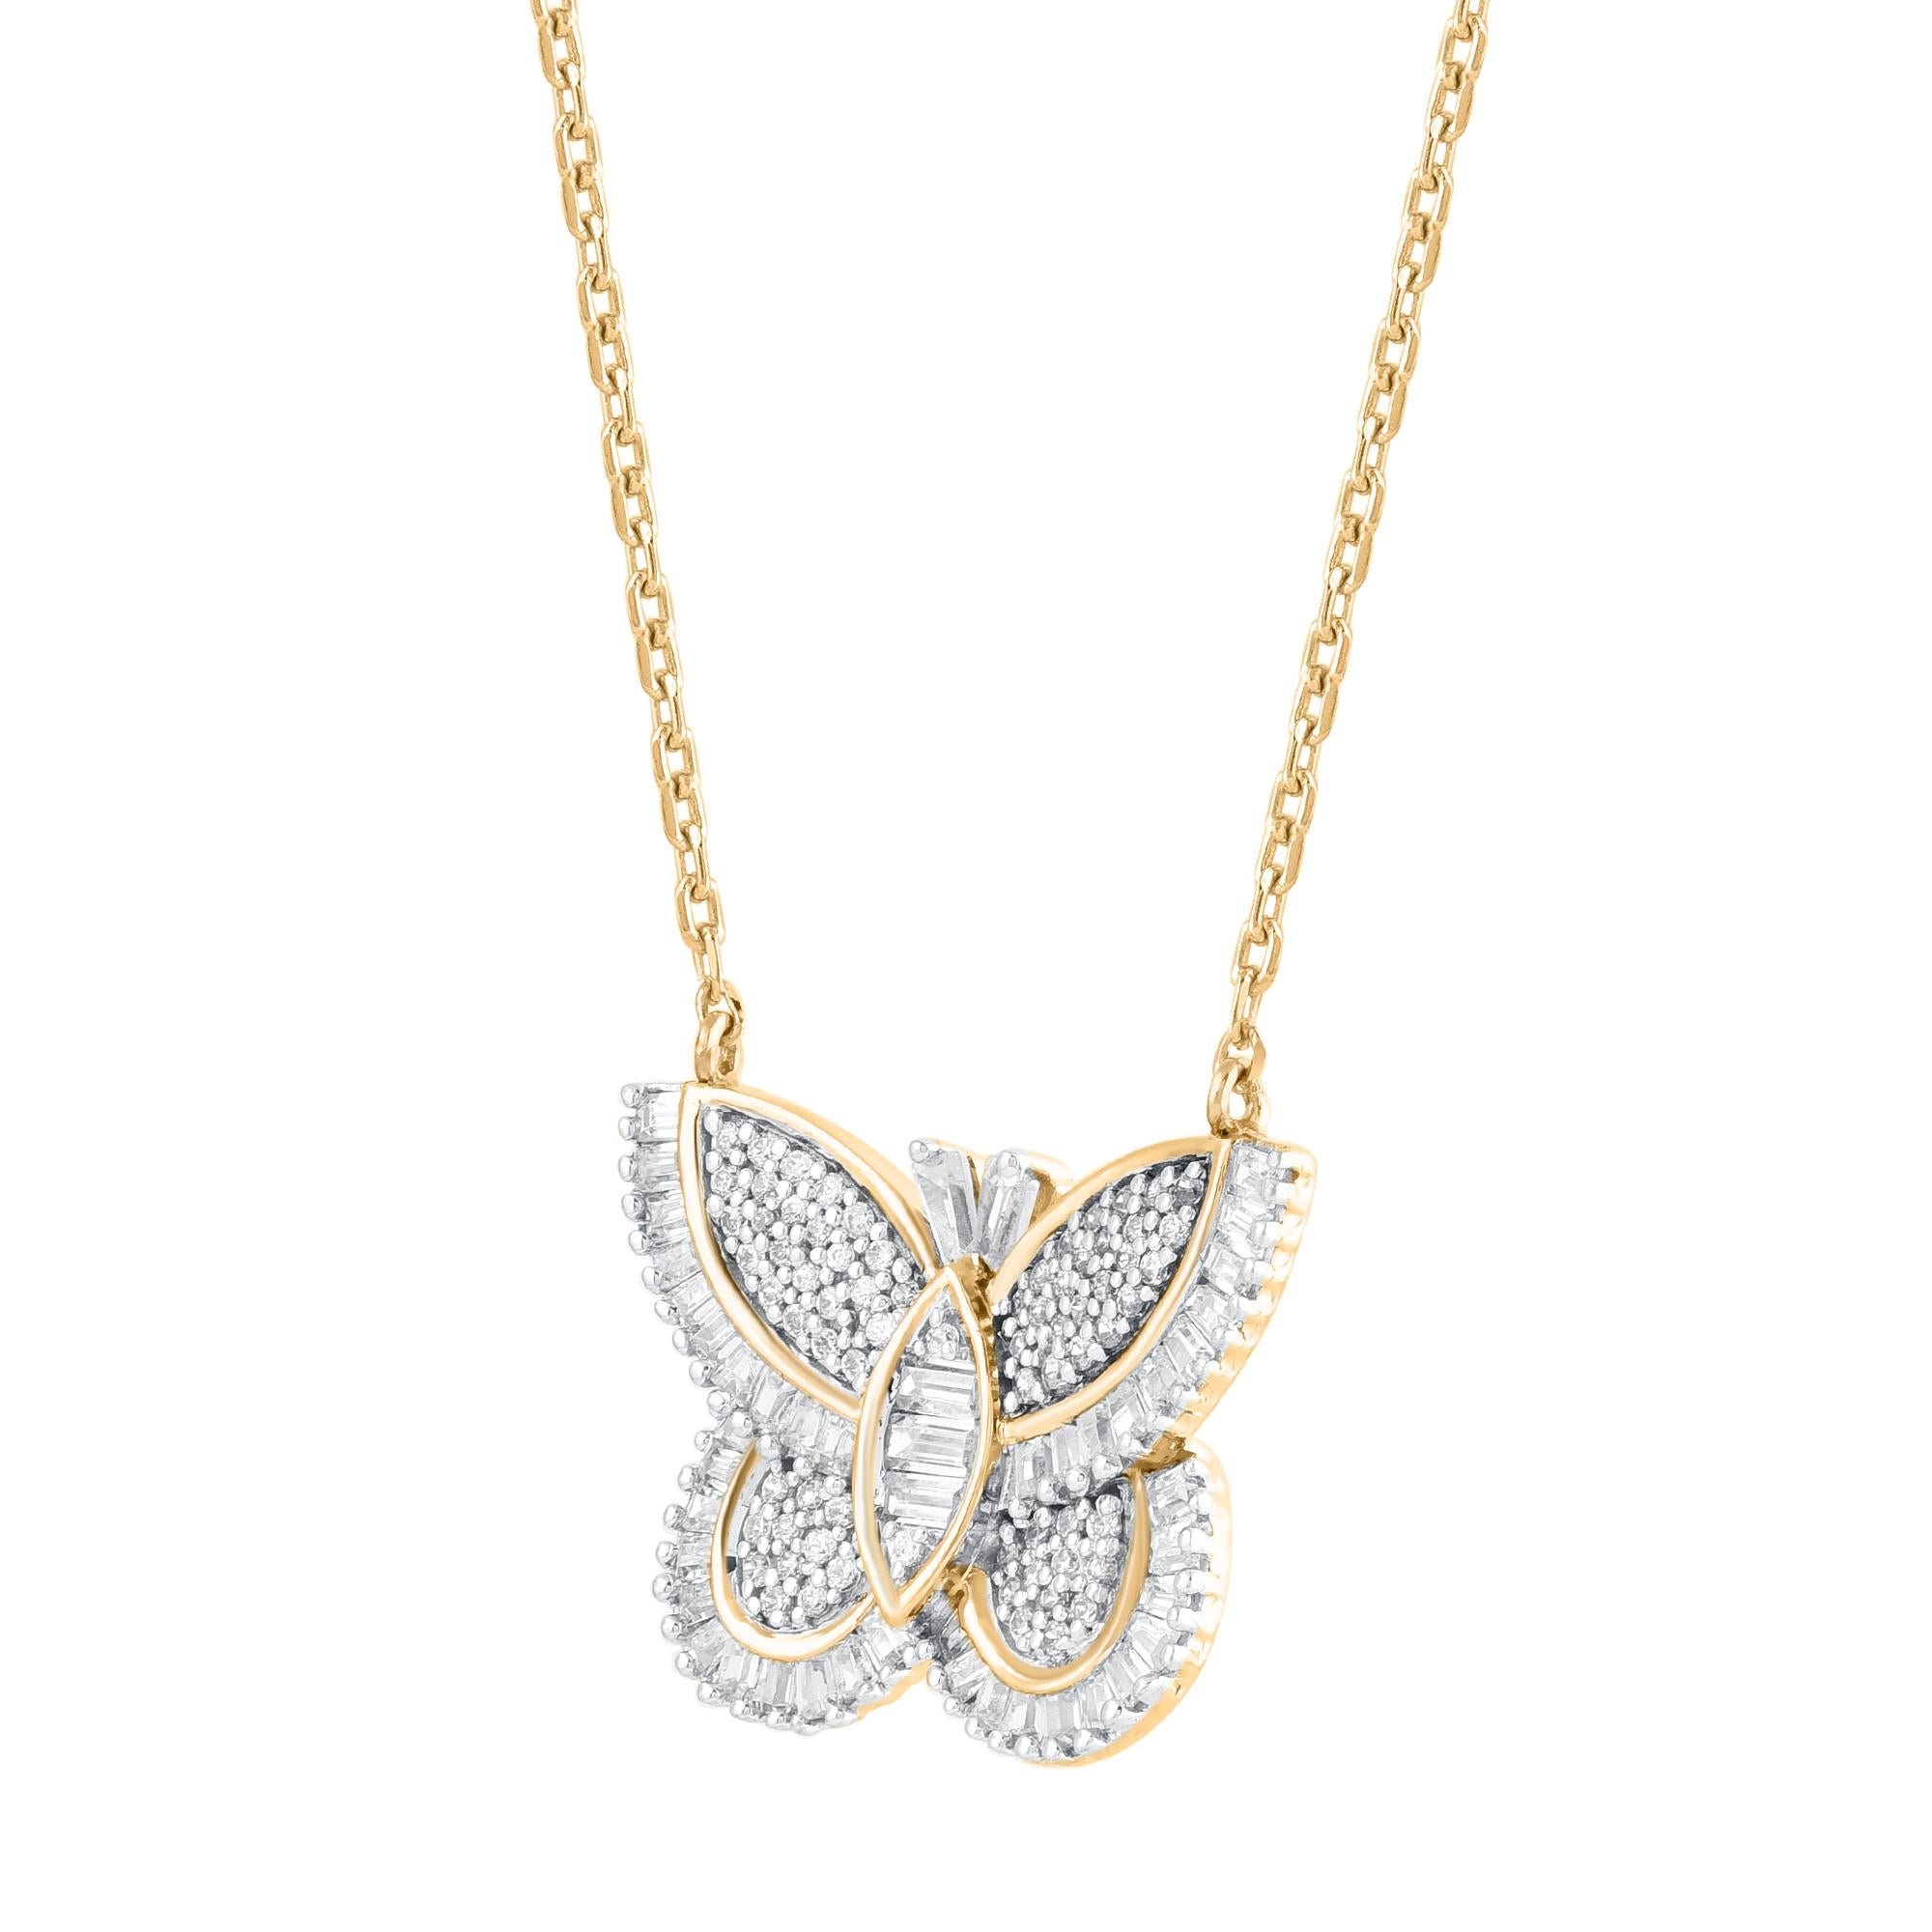 This diamond butterfly pendant necklace fits any occasion with ease. These pendants are studded with 139 single cut & baguette natural diamonds in pave & channel setting in 18kt yellow gold. Diamonds are graded as H-I color and I-2 clarity. Pendant